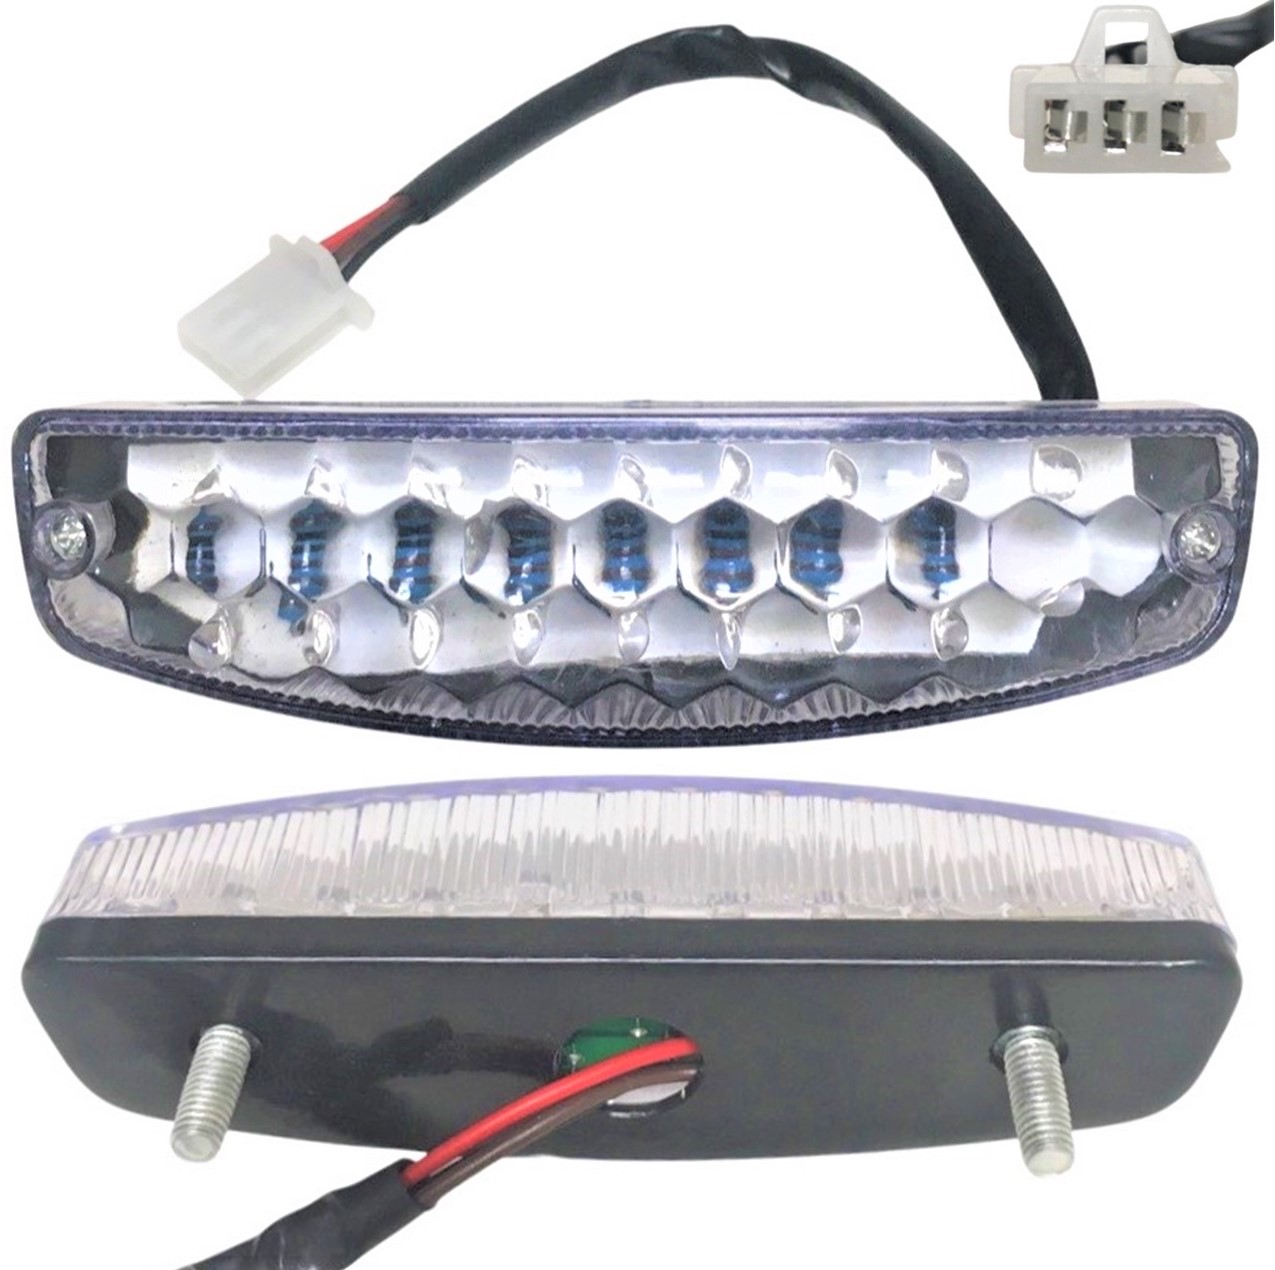 Rear Tail Light Fits Many ATV's, DirtBikes, and GoKarts W=5 H=1.5 3Pins in a 3 Pin Male Jack - Click Image to Close